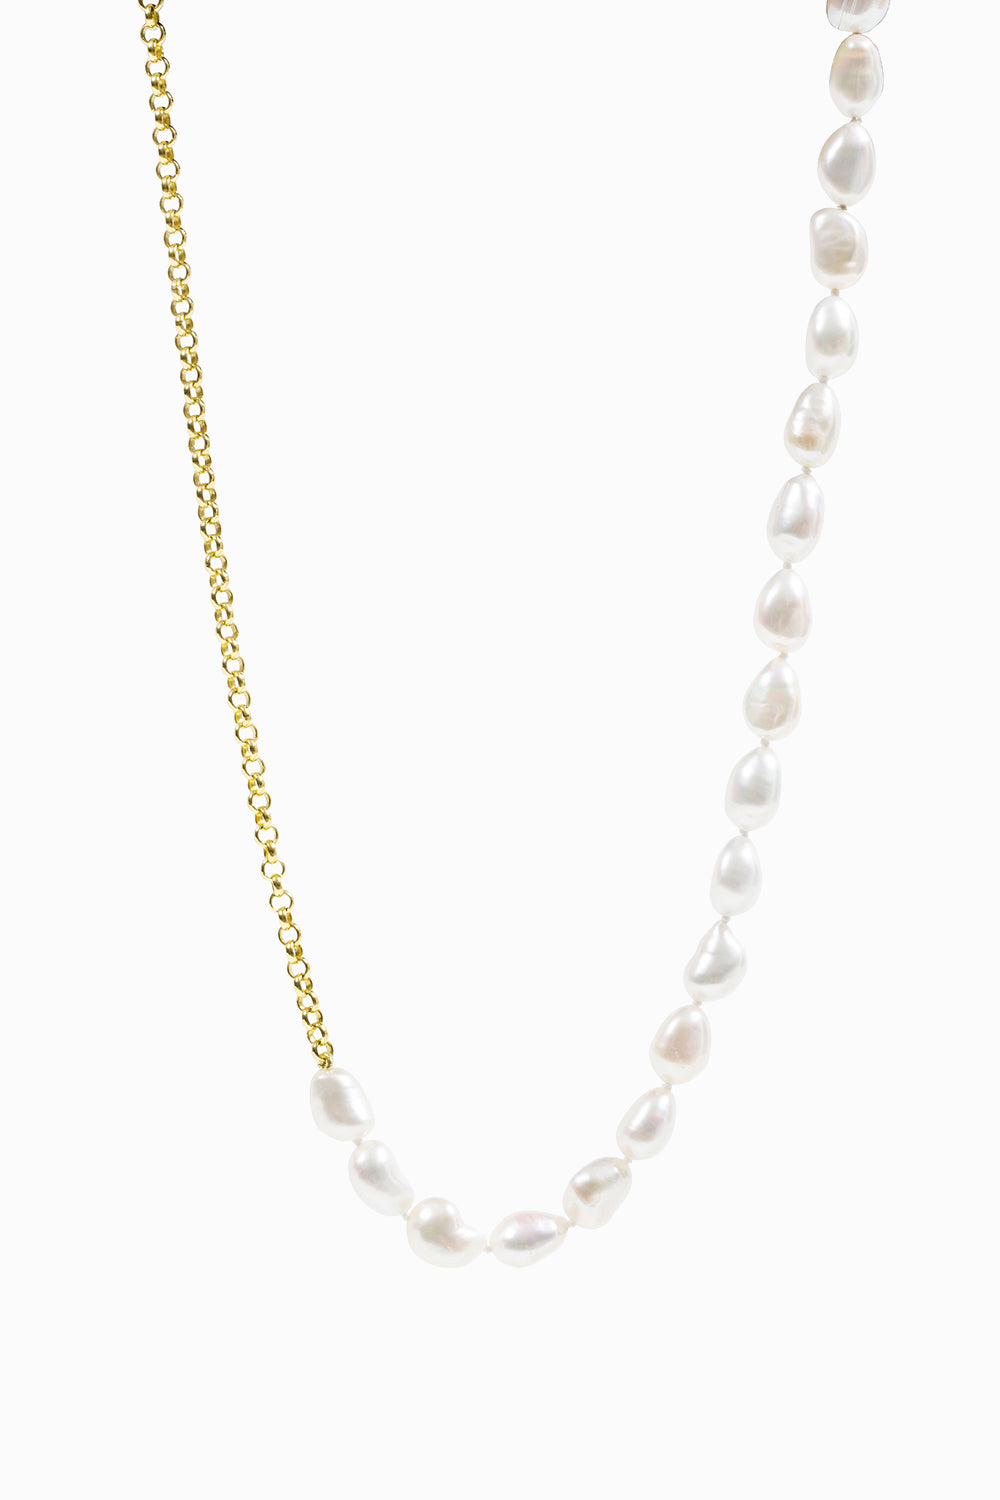 Pearls and chain necklace